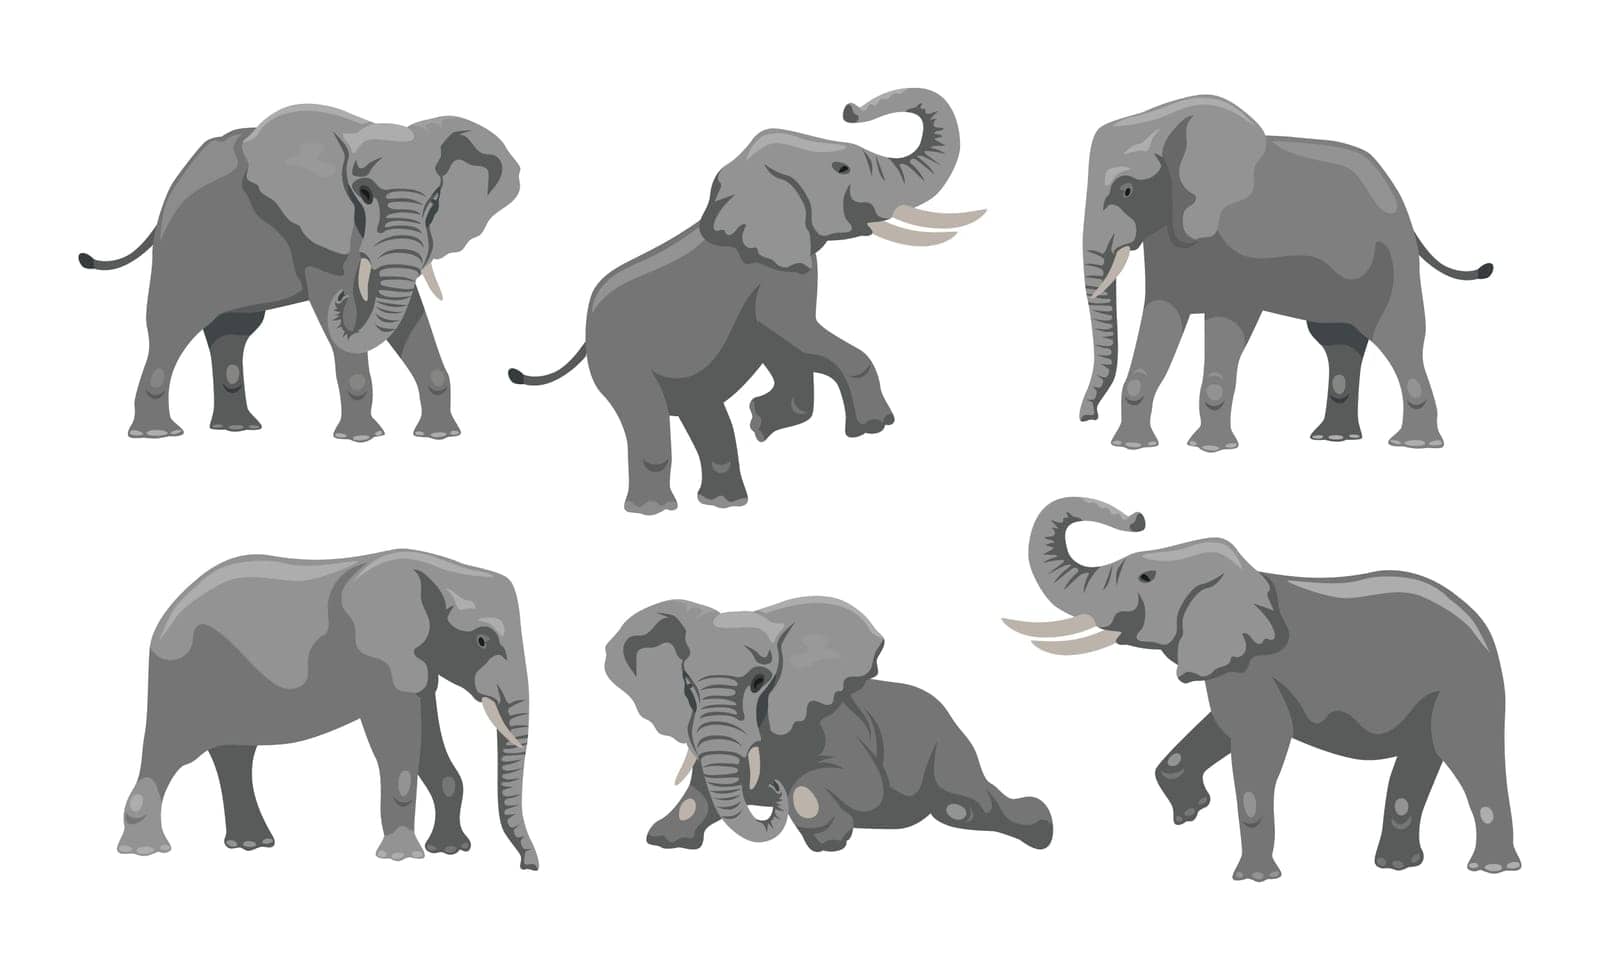 Gray elephant in different positions cartoon illustration set. Big African mammal character with large ears and trunk walking, lying and jumping on white background. Animal, zoo, wildlife concept